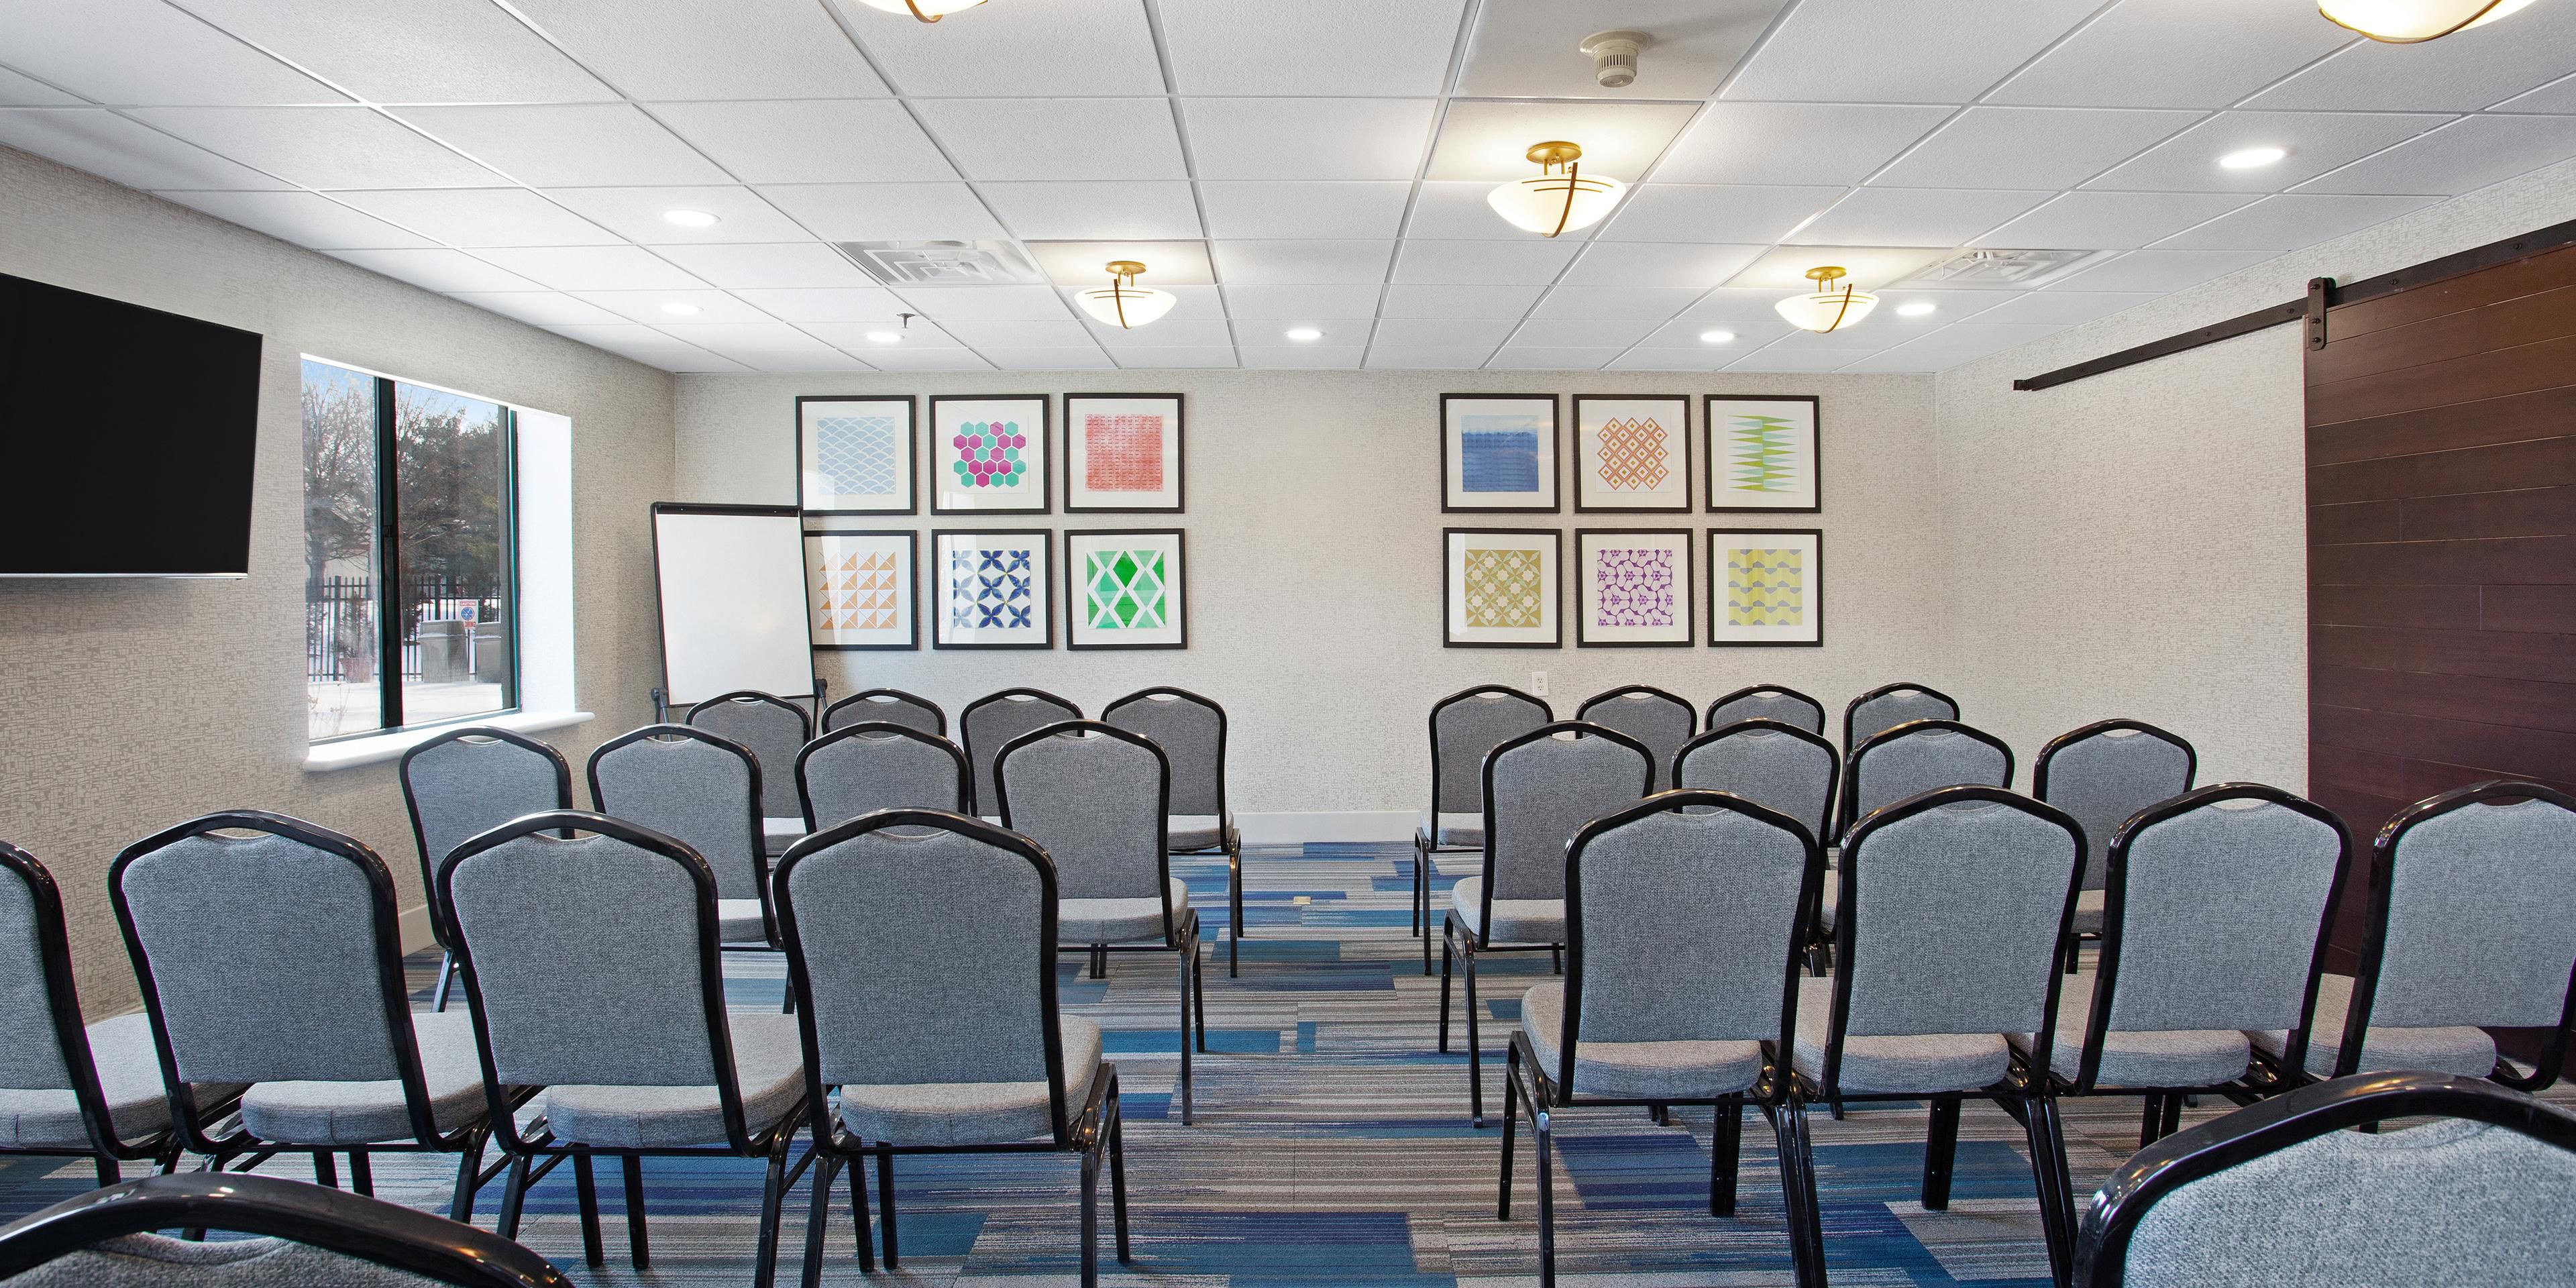 Looking for the perfect venue to host your next event? Look no further than the Holiday Inn Express Exton - Great Valley! Our newly renovated hotel features 400 square feet of stylish and modern meeting space, ideal for up to 40 attendees.